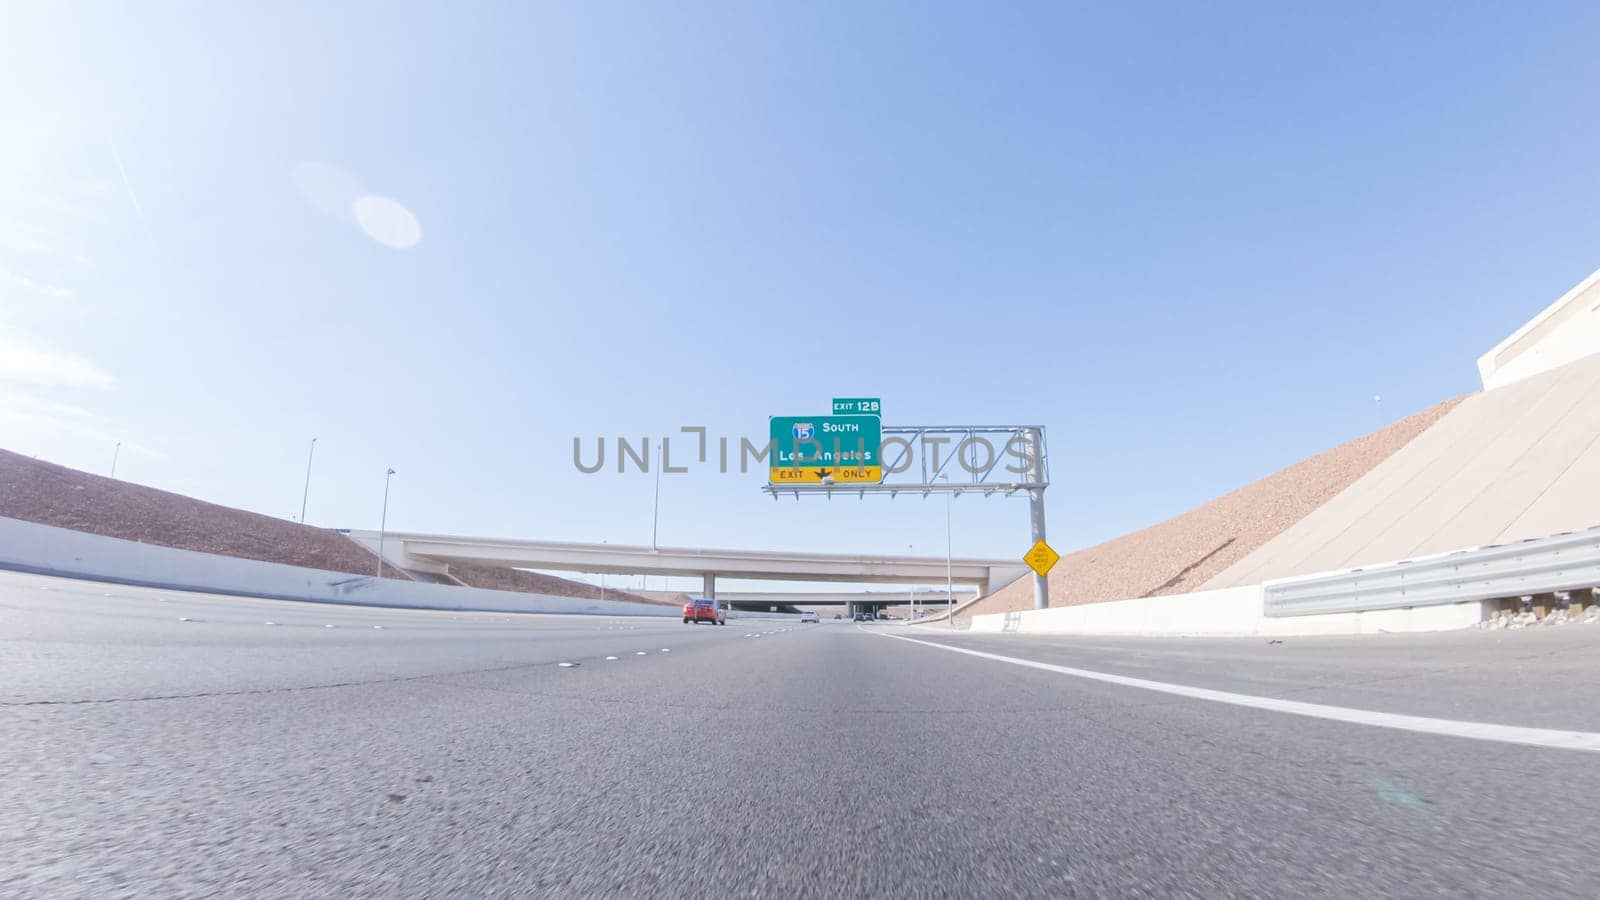 Cruising through Las Vegas in a sleek Tesla vehicle on Highway 15 during the day adds an extra touch of luxury and sustainability to your road trip adventure to California.